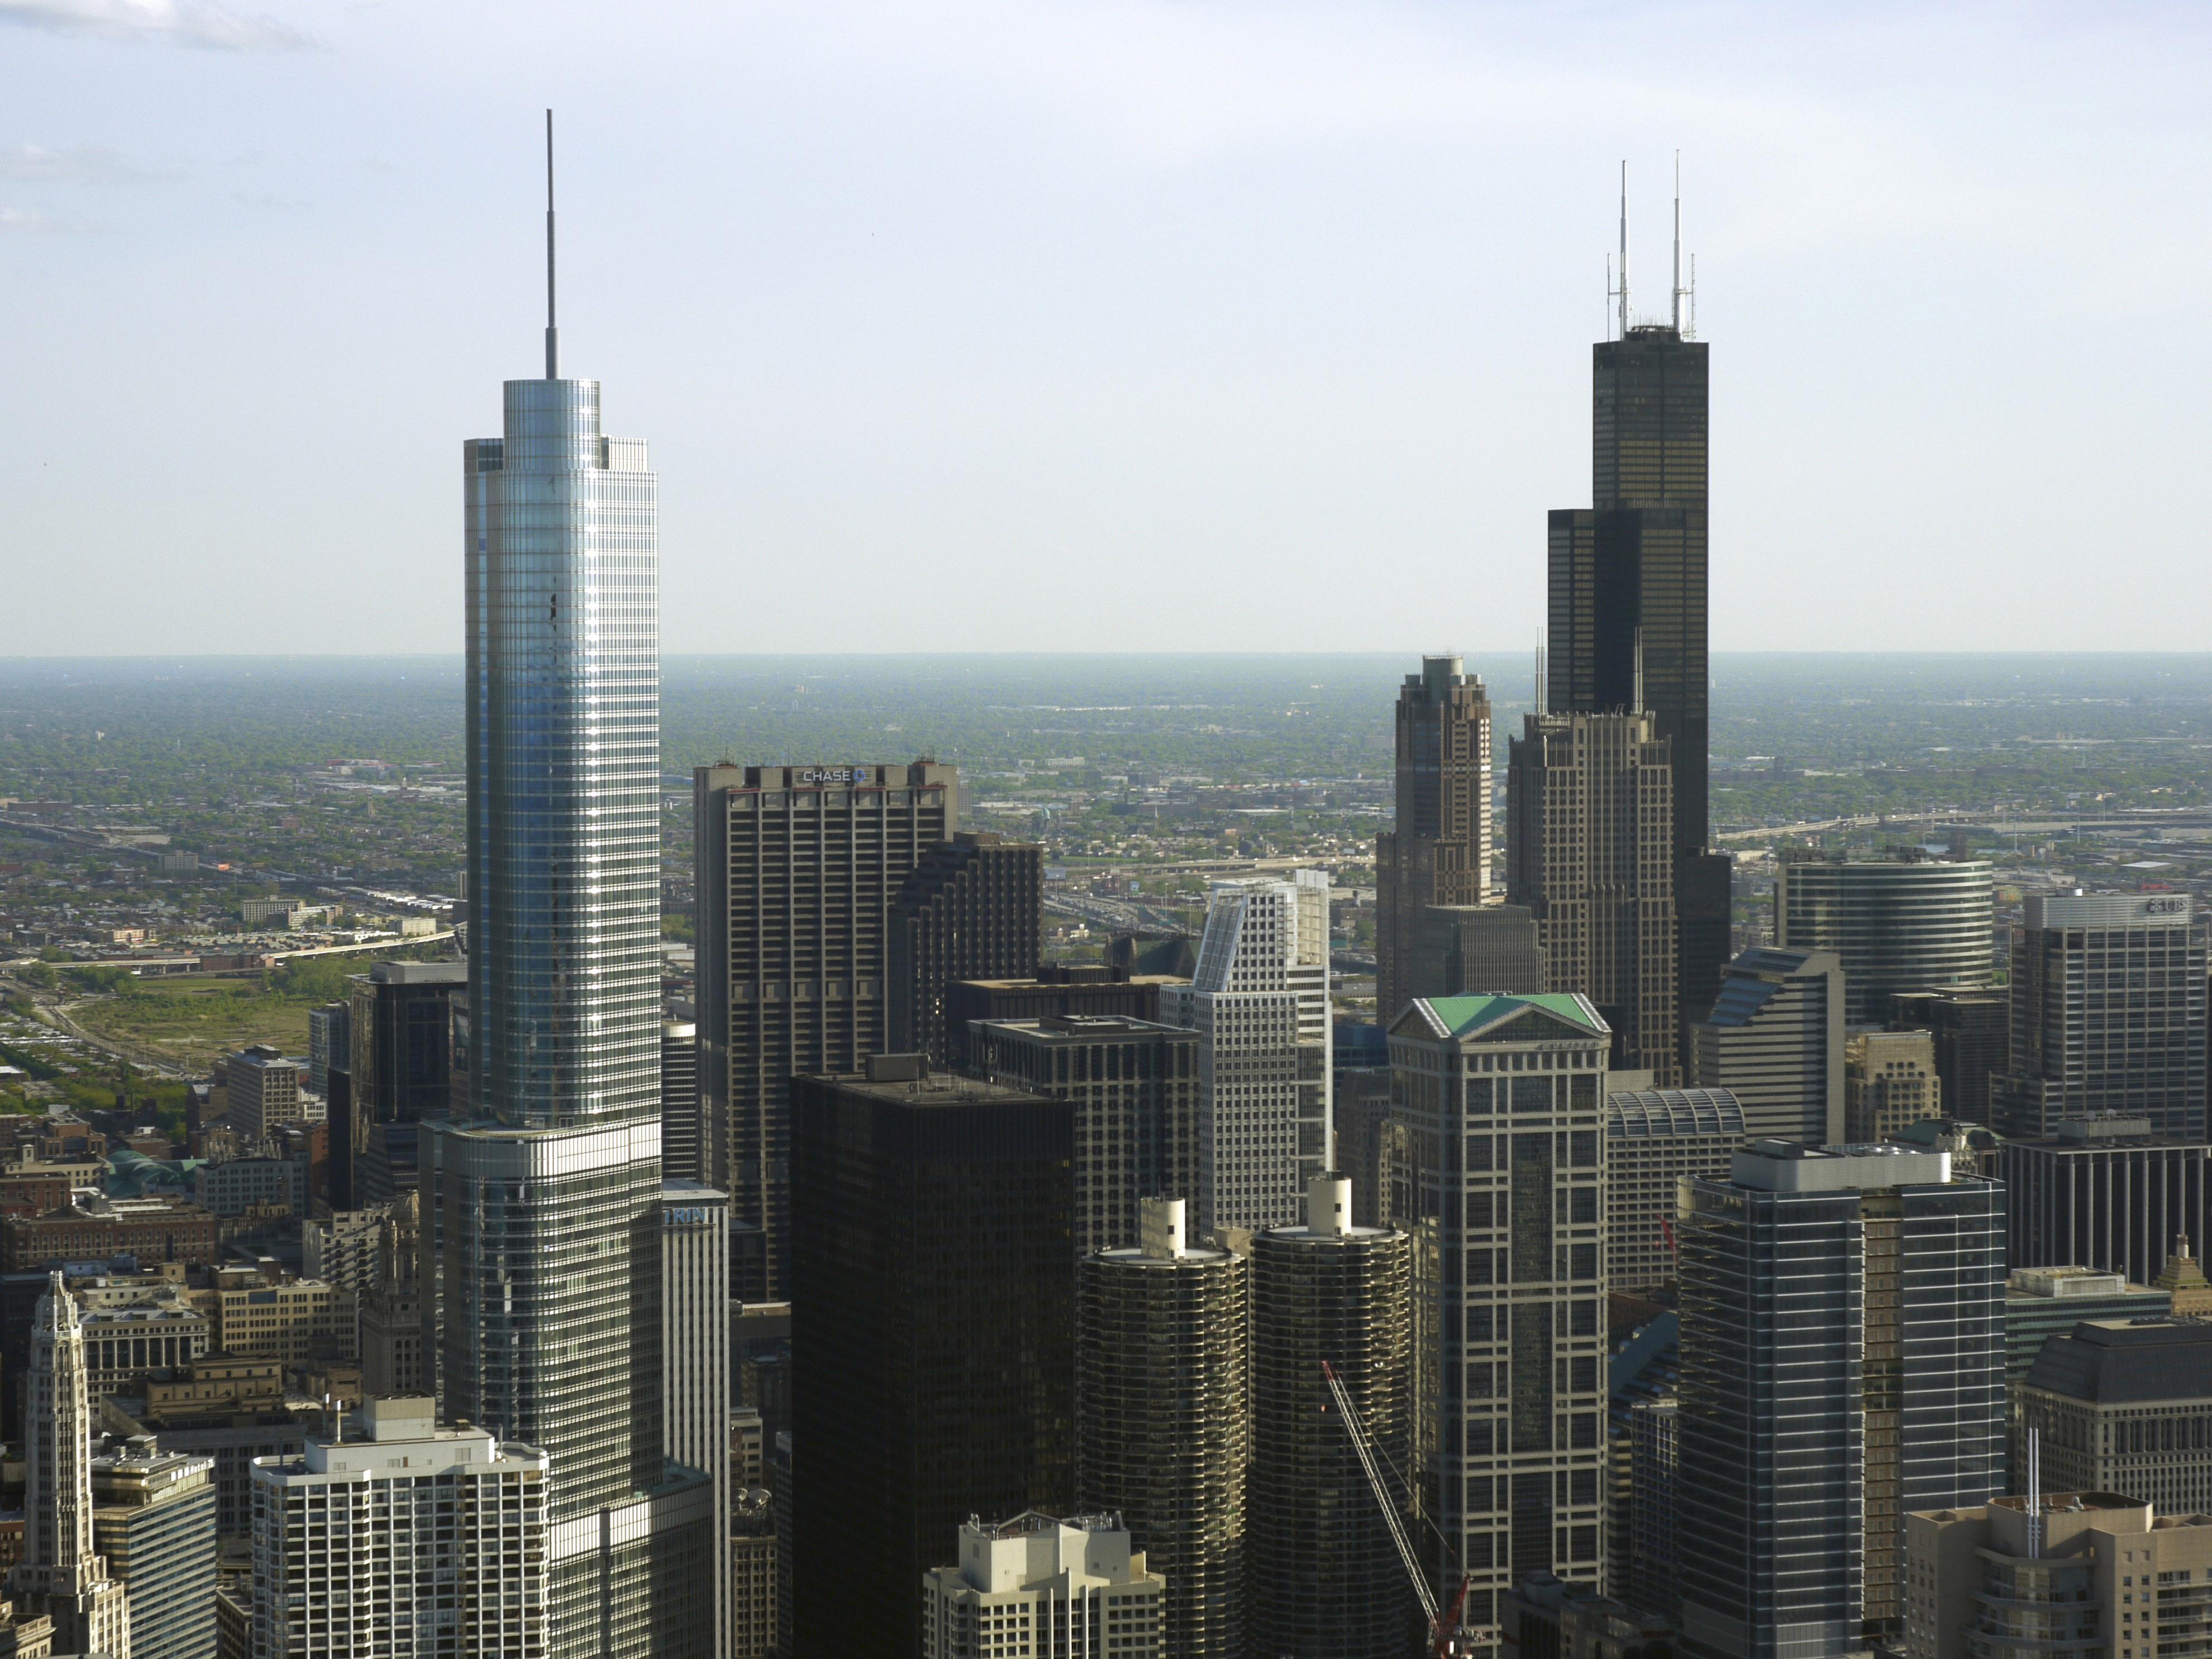 Chicago’s Willis Tower, right, scored a 55 on the Environmental Protection Agency’s Energy Star rating system. Trump Tower, left, scored a nine. (Chad Kainz / Flickr)